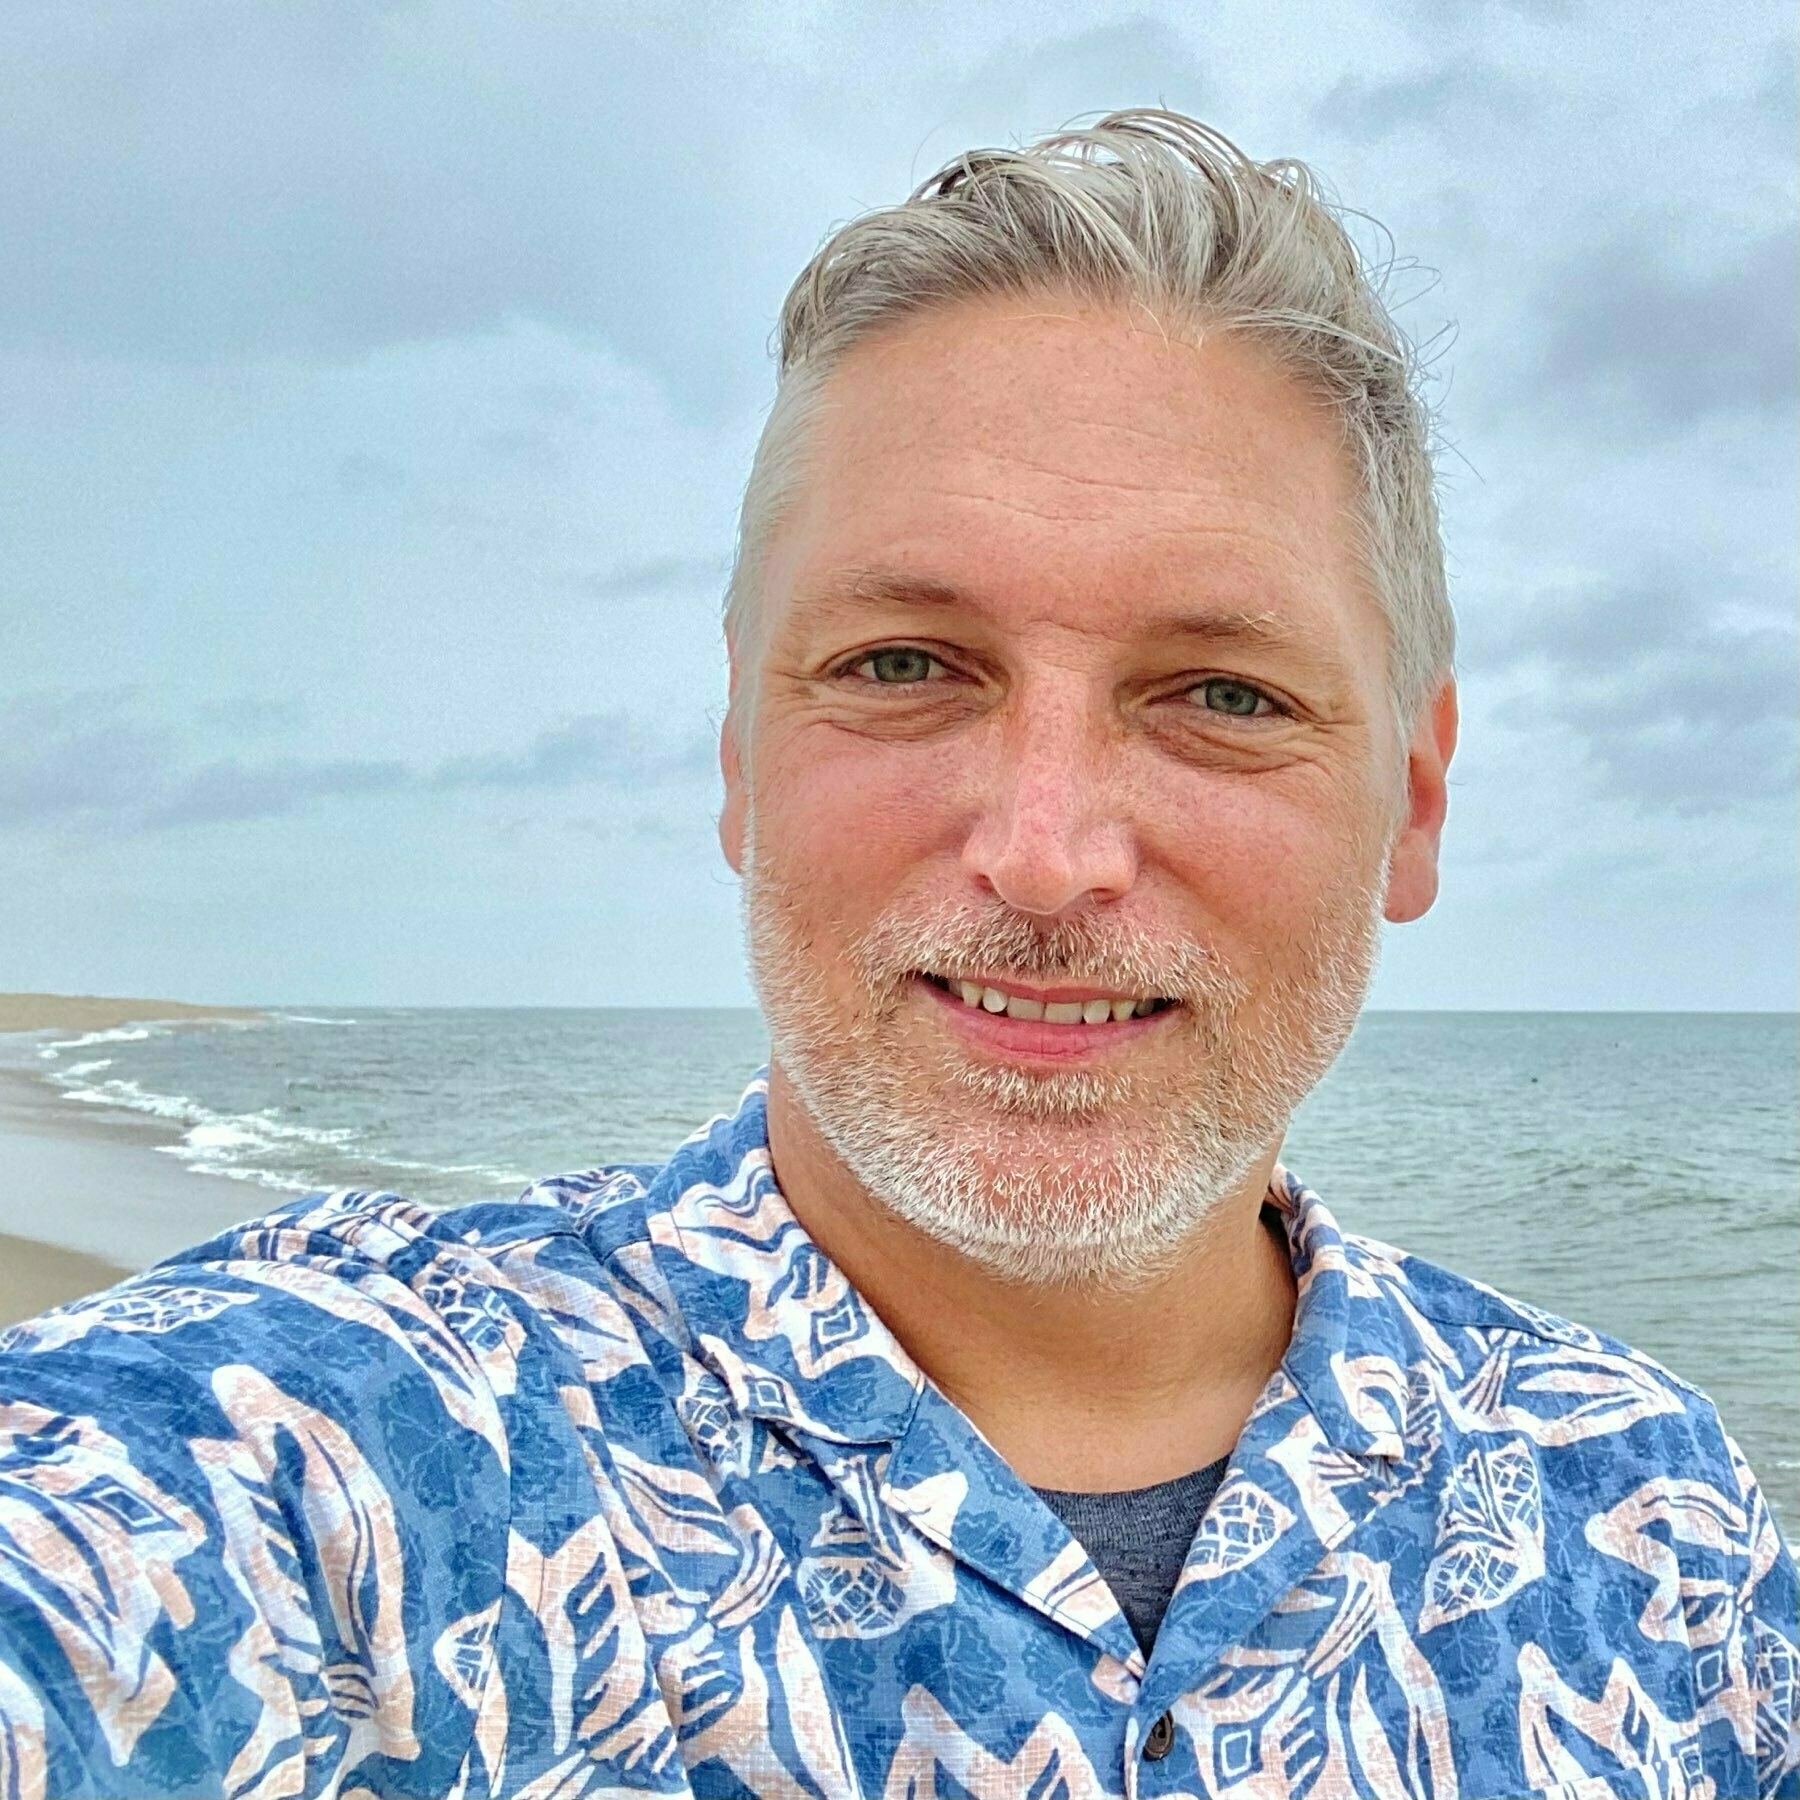 selfie against a backdrop of ocean and beach. i'm wearing a vaguely hawaiian style orint shirt, with grey stubble